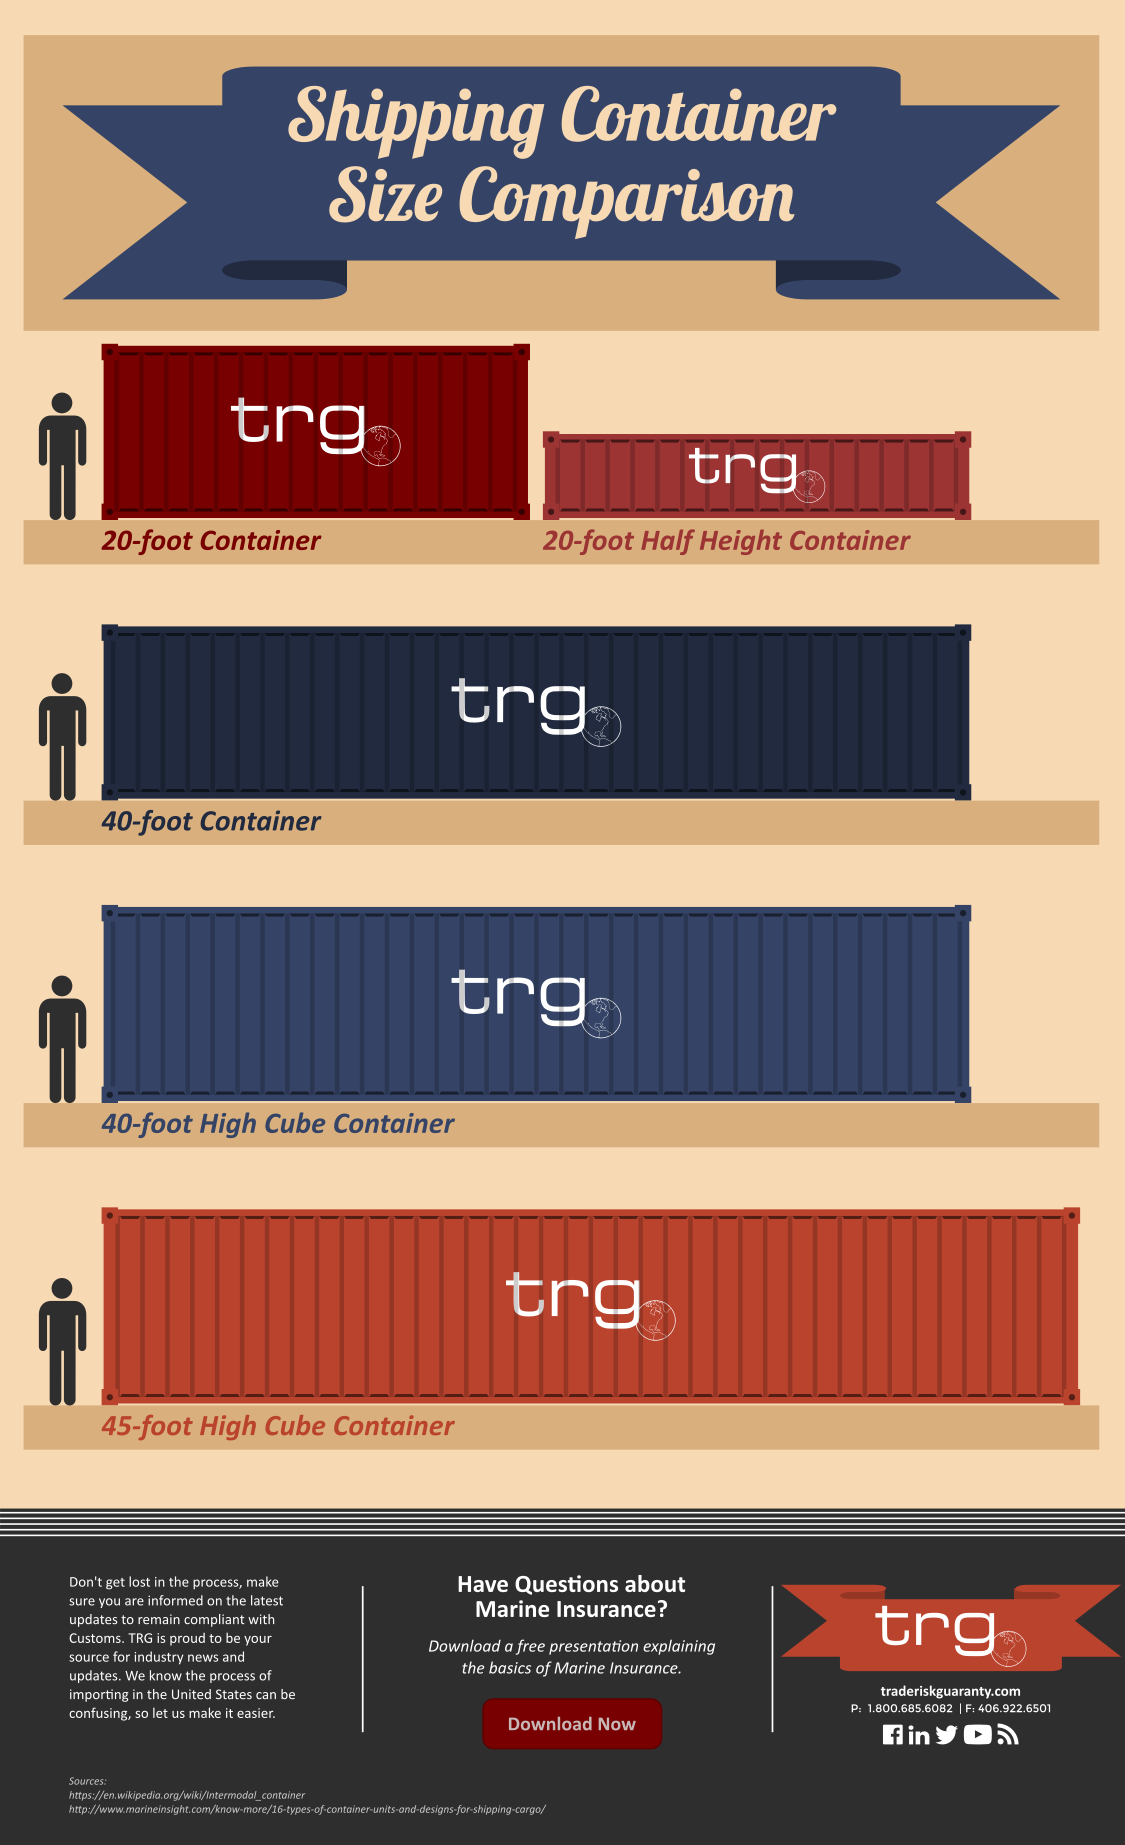 An infographic illustrating a size comparison of the most common shipping container types.